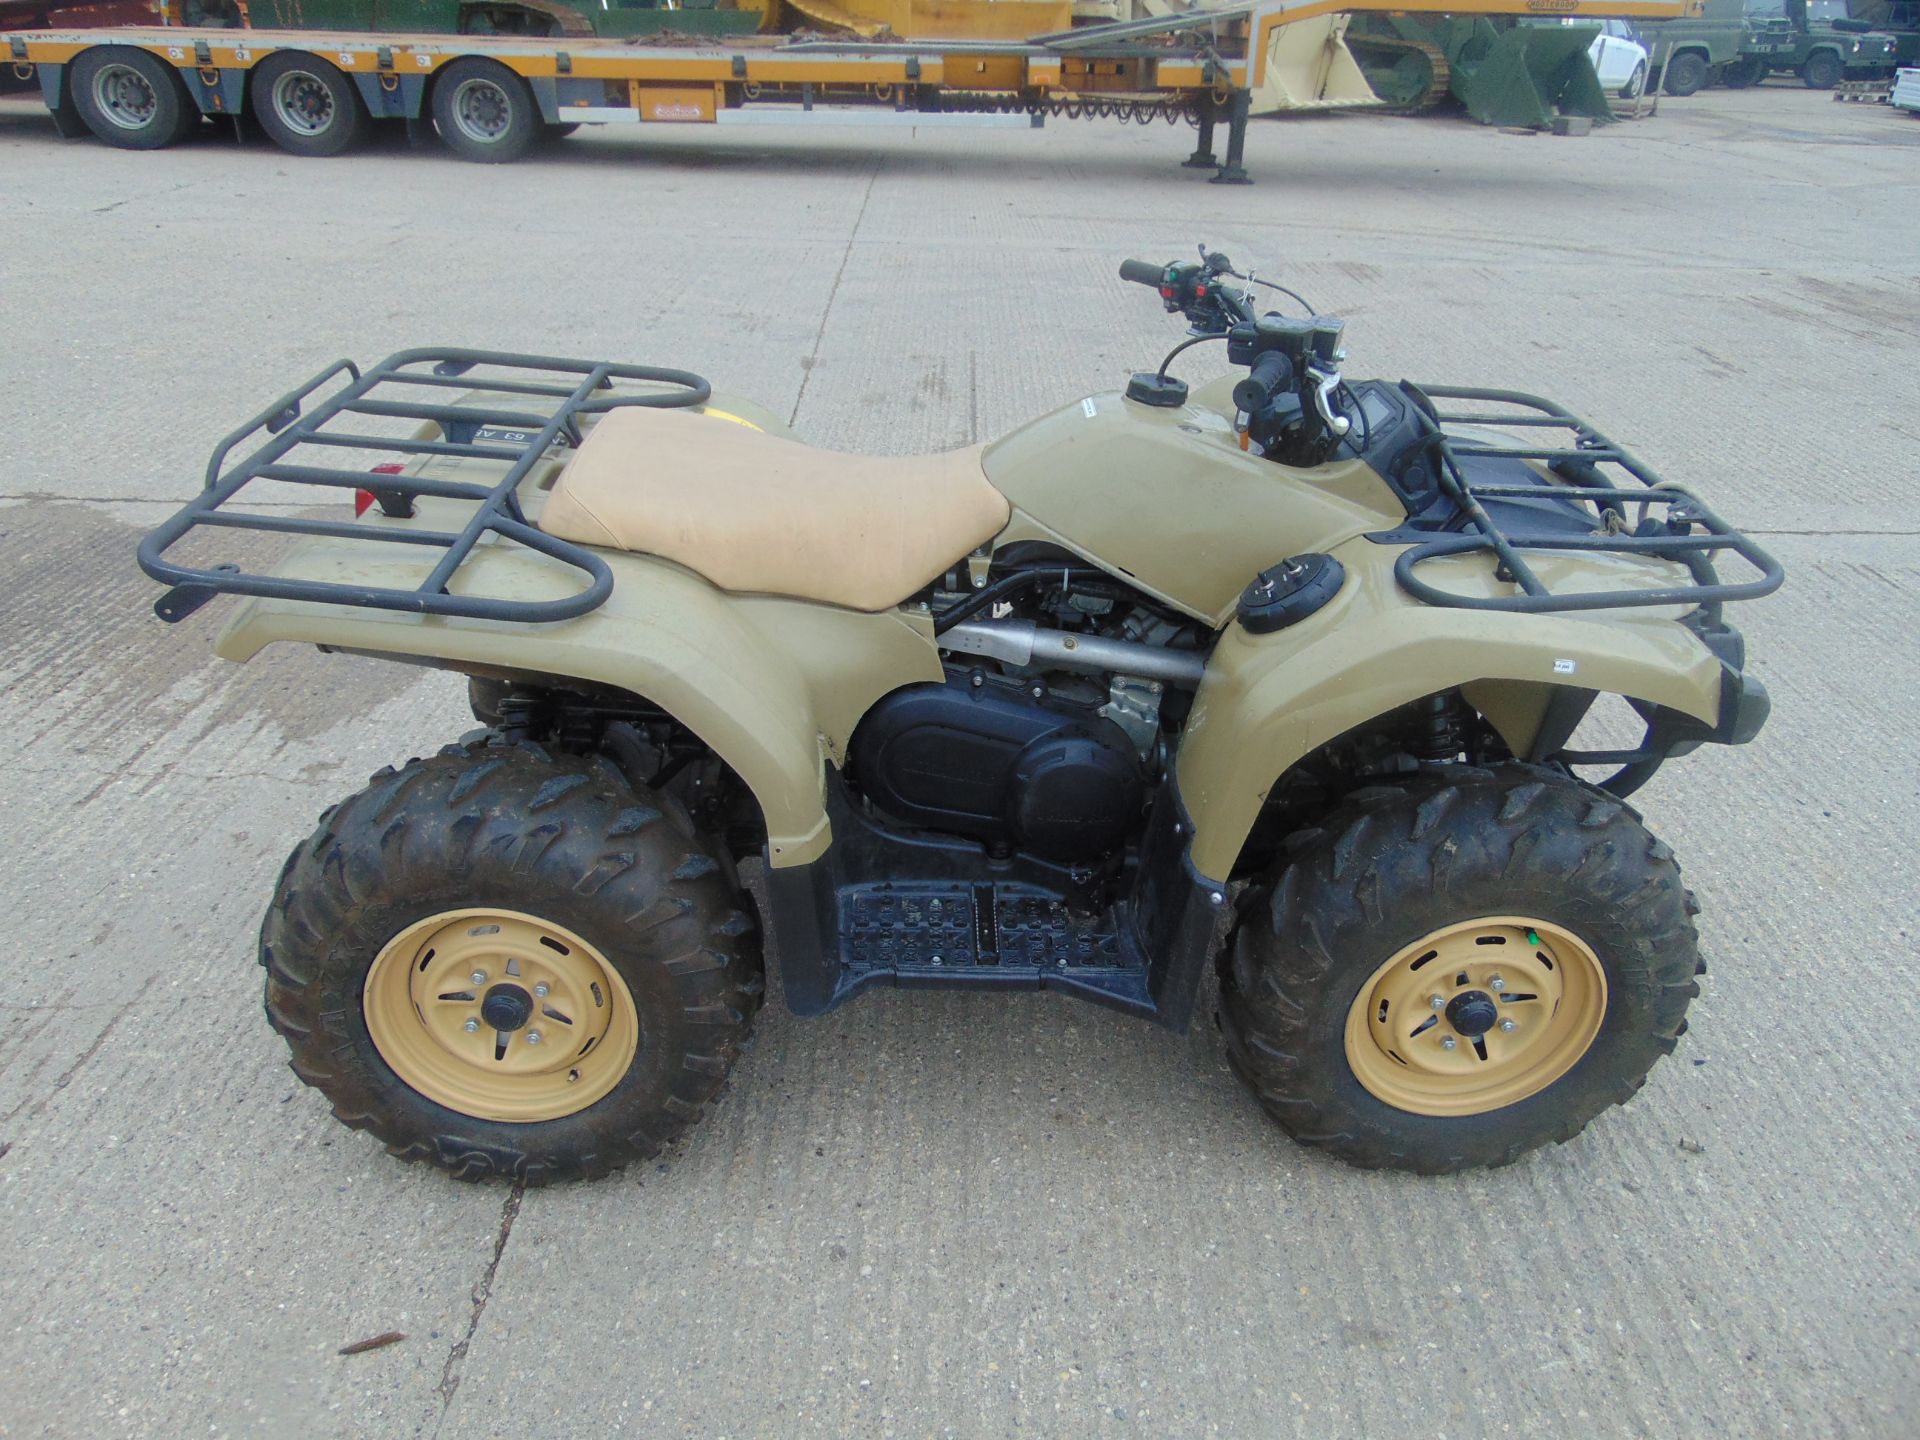 Military Specification Yamaha Grizzly 450 4 x 4 ATV Quad Bike - Image 8 of 19